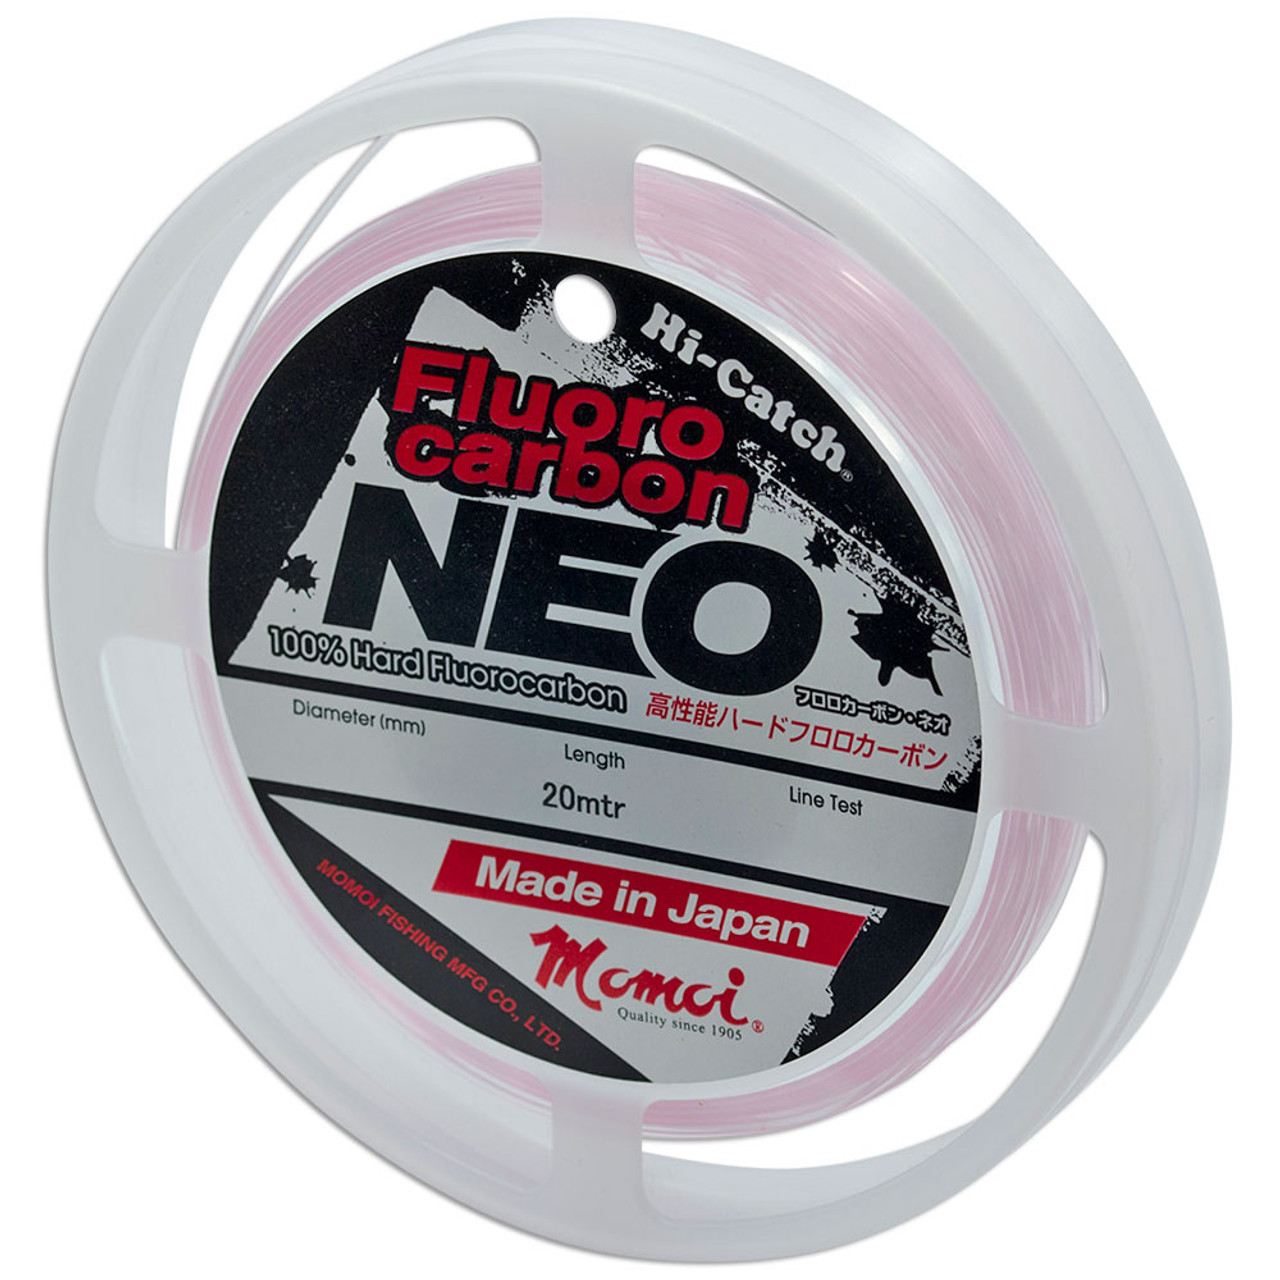 https://cdn11.bigcommerce.com/s-55834/images/stencil/1280x1280/products/4970/17856/momoi-neo-fluorocarbon-leader__21875.1593208130.jpg?c=2